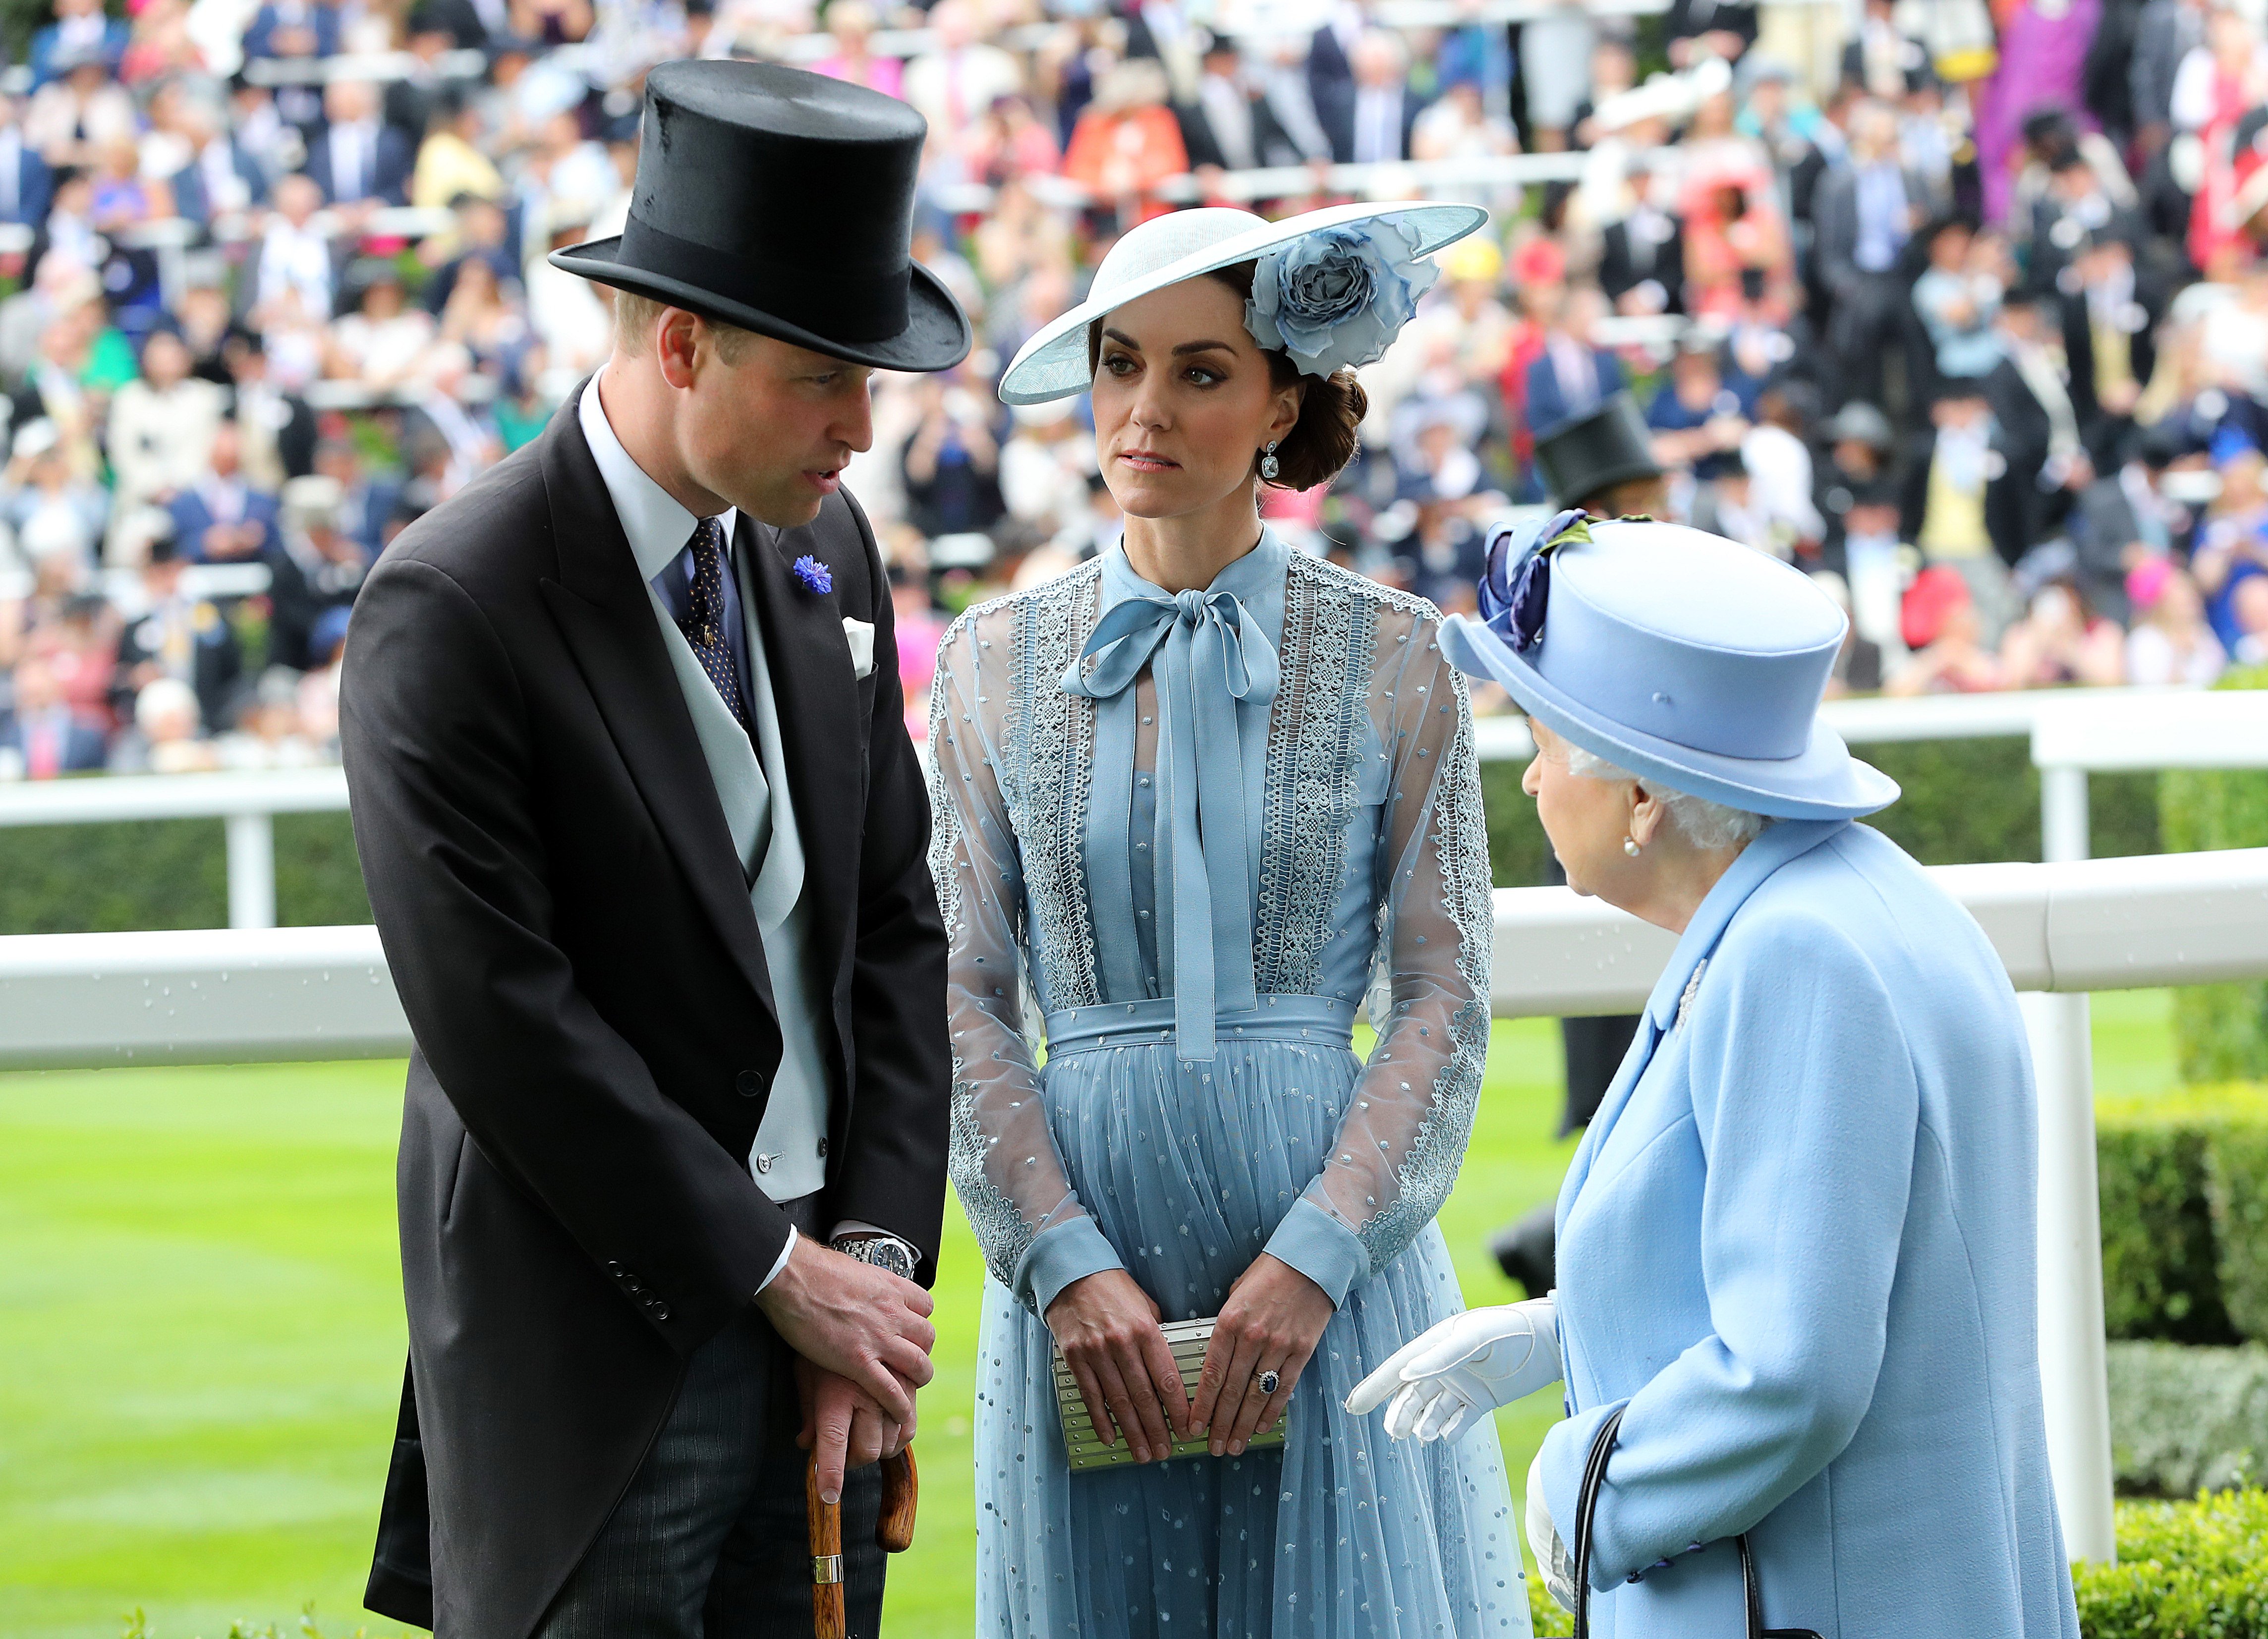 Queen Elizabeth, Prince William and Kate Middleton having a conversation in Ascot England 2019. | Source: Getty Images